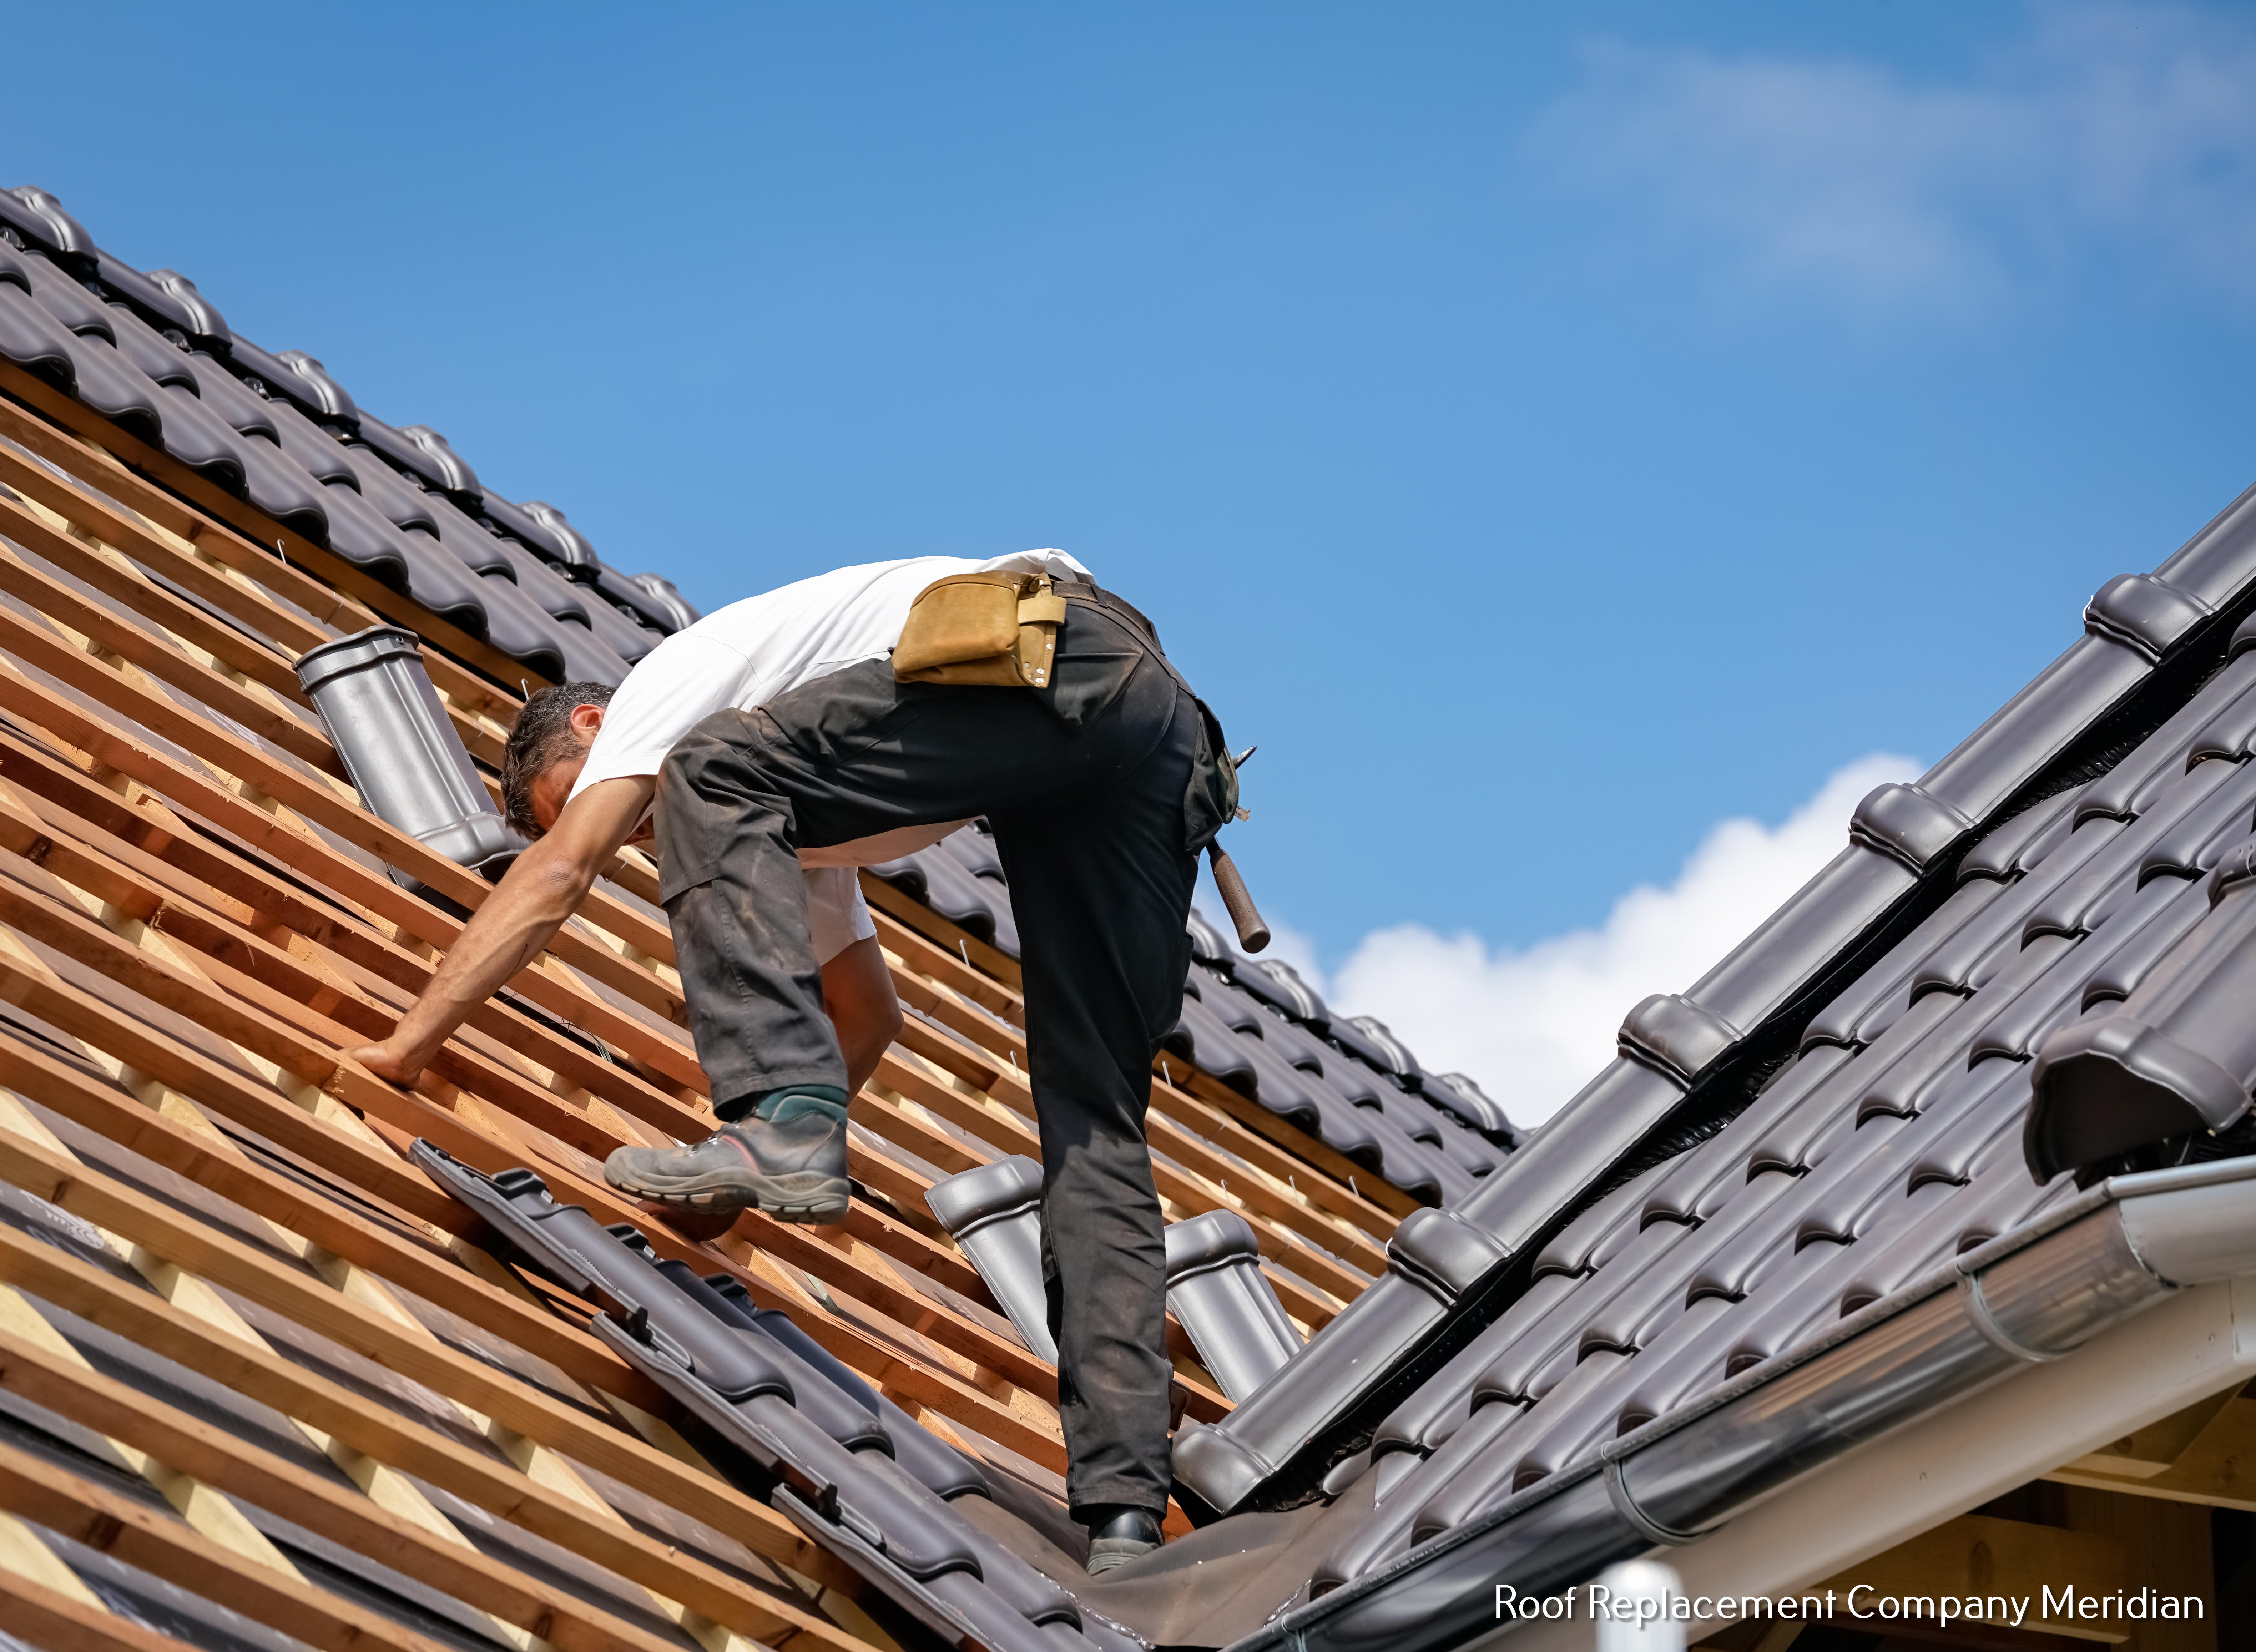 Three Brothers LLC Is The Number One Roof Replacement Company In Meridian, ID.